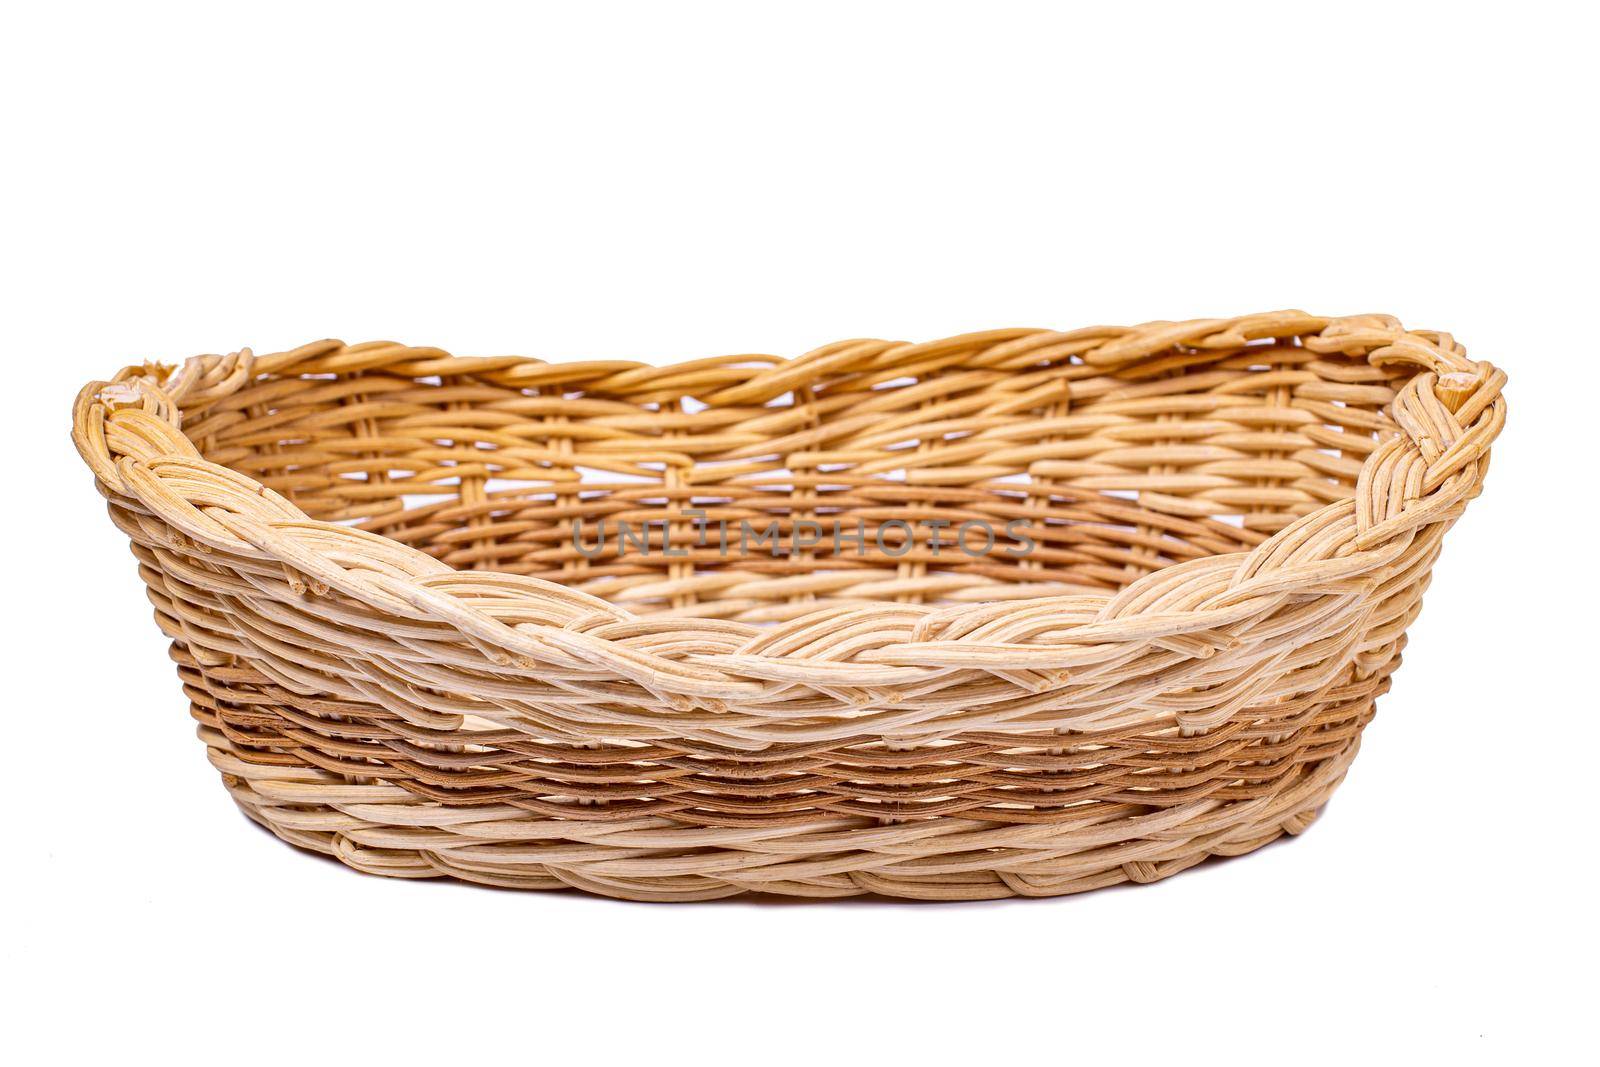 handmade wicker basket, insulated on white background by bySergPo